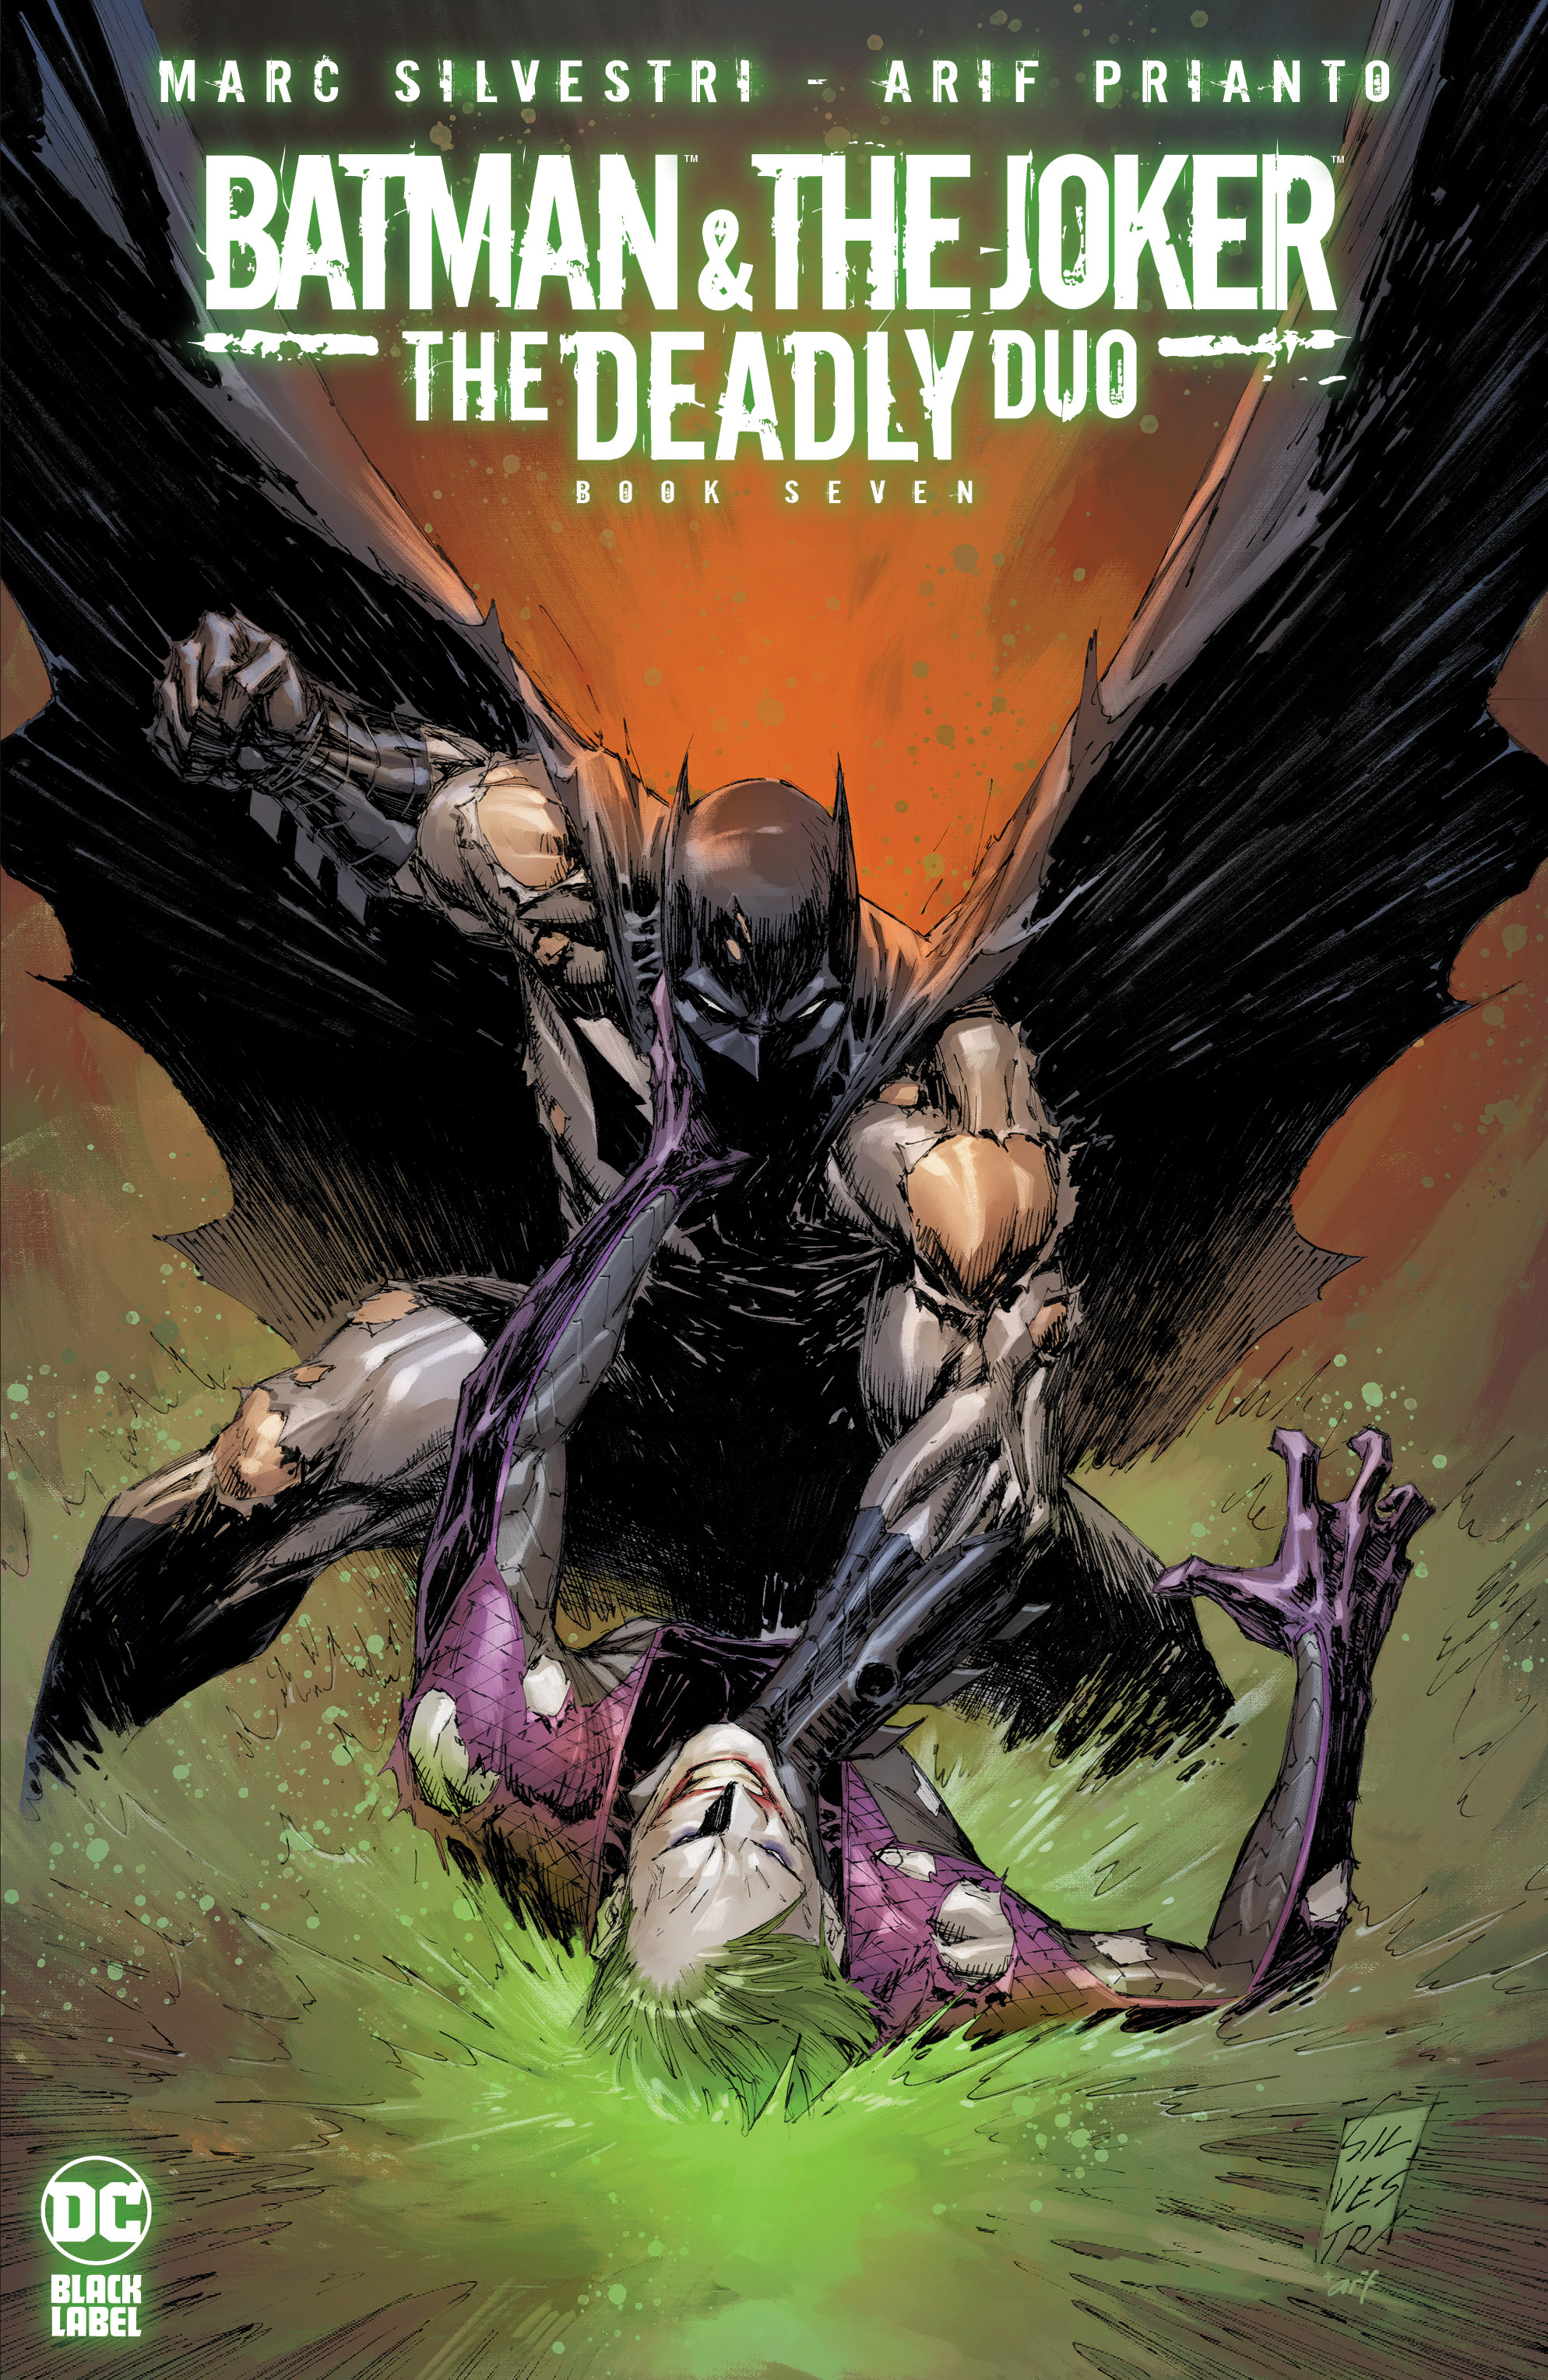 Batman & The Joker The Deadly Duo #7 Cover A Marc Silvestri (Mature) (Of 7)